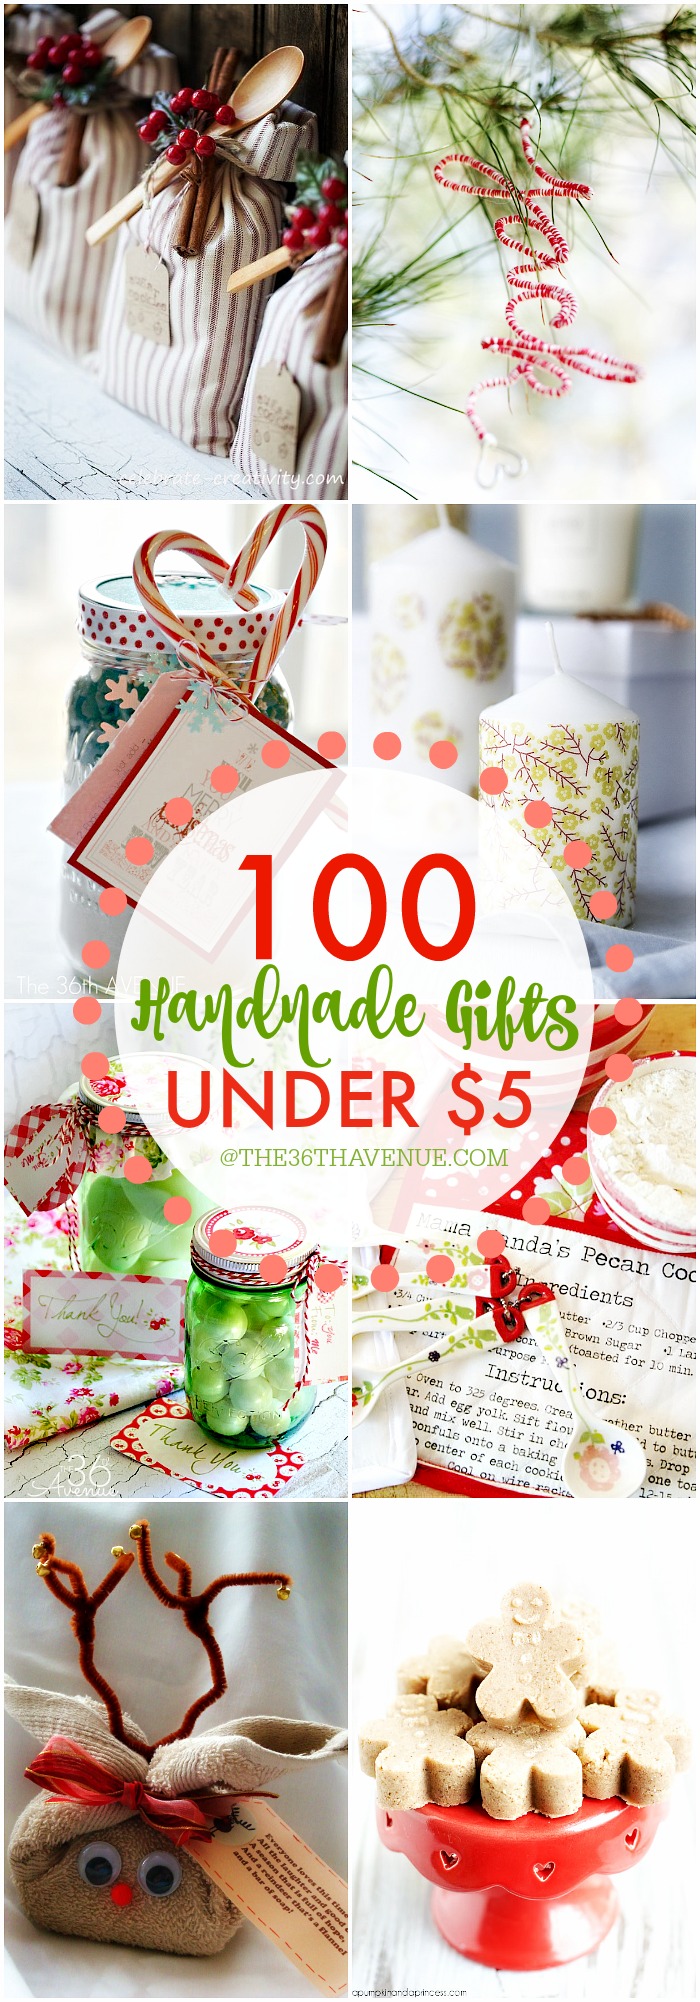 5 Easy Last Minute Neighbor Gifts Under $5 - A Mom's Take